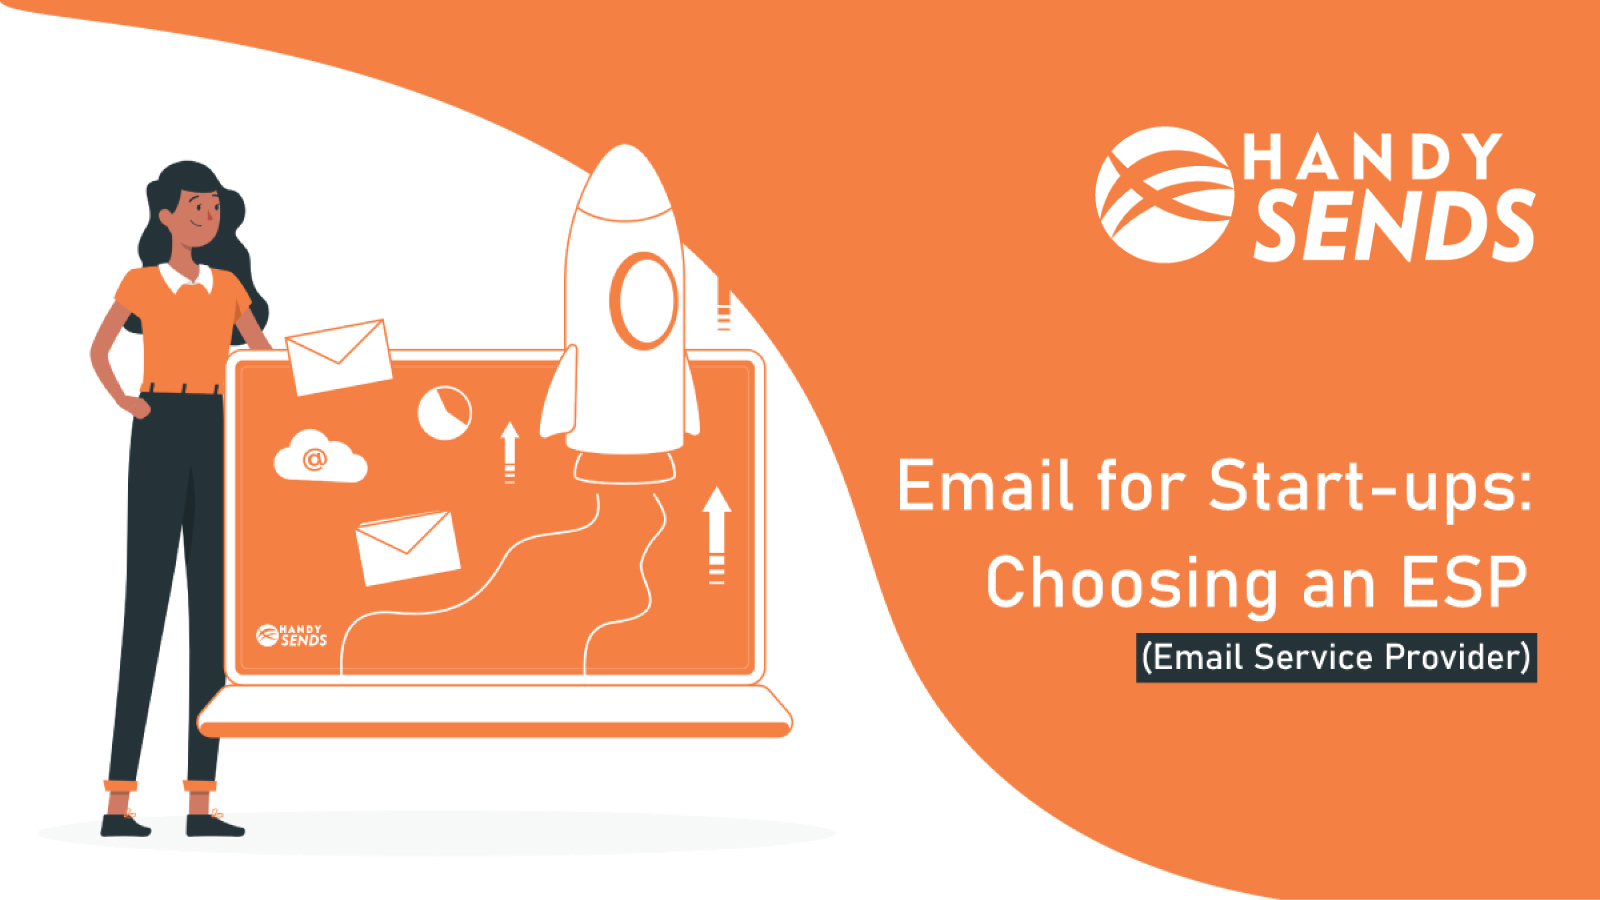 Email for Start-ups: Choosing an ESP (Email Service Provider)